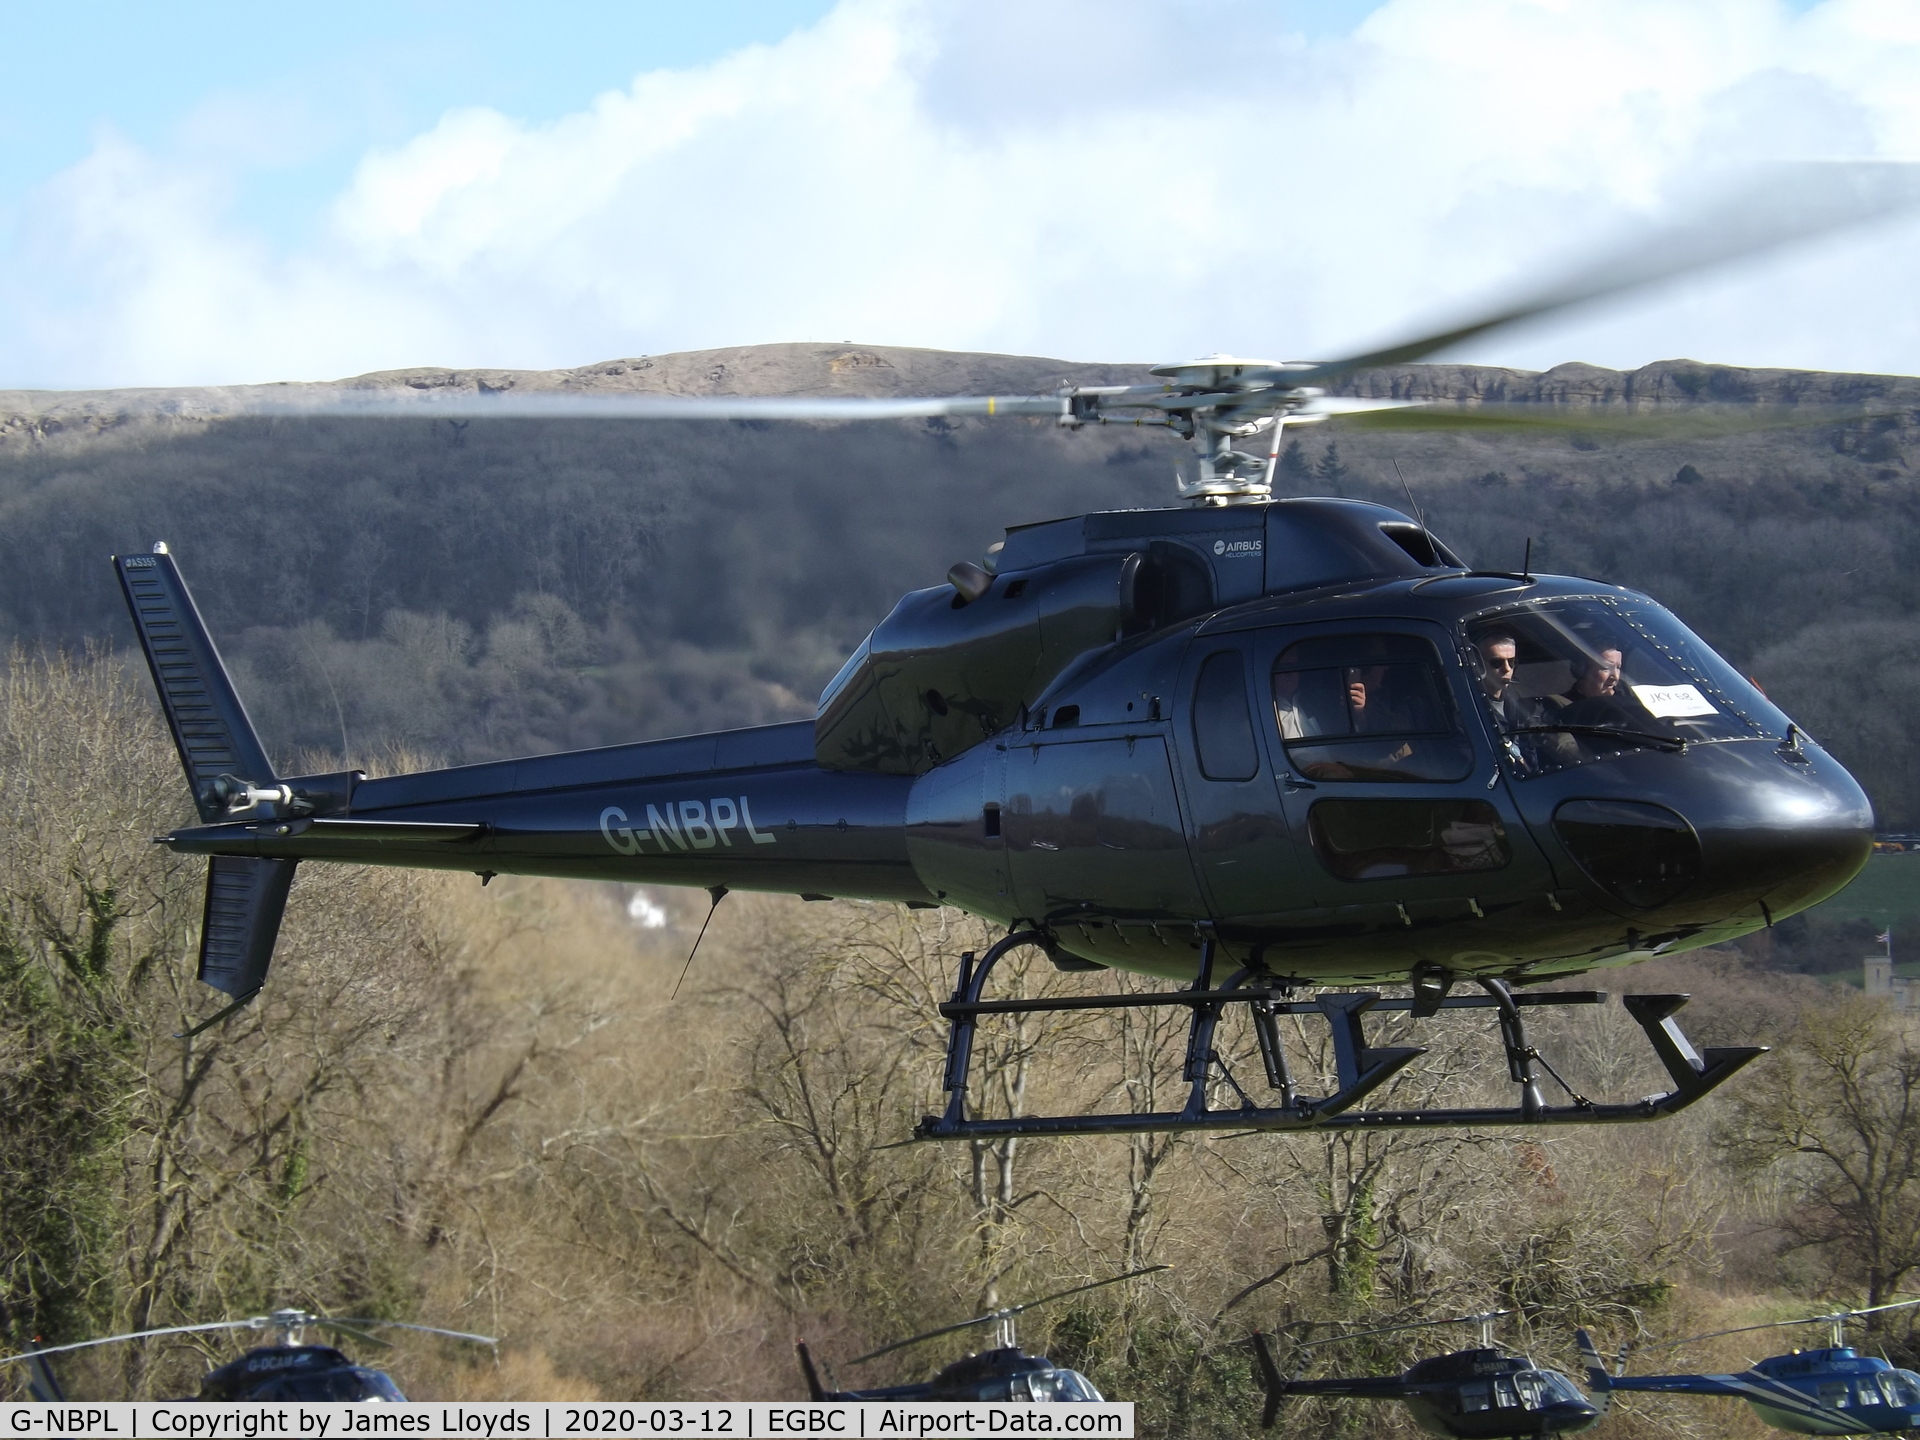 G-NBPL, 1991 Aérospatiale AS-355F-2 Ecureuil 2 C/N 5483, Arriving at Cheltenham Helipad for the 2020 Gold Cup